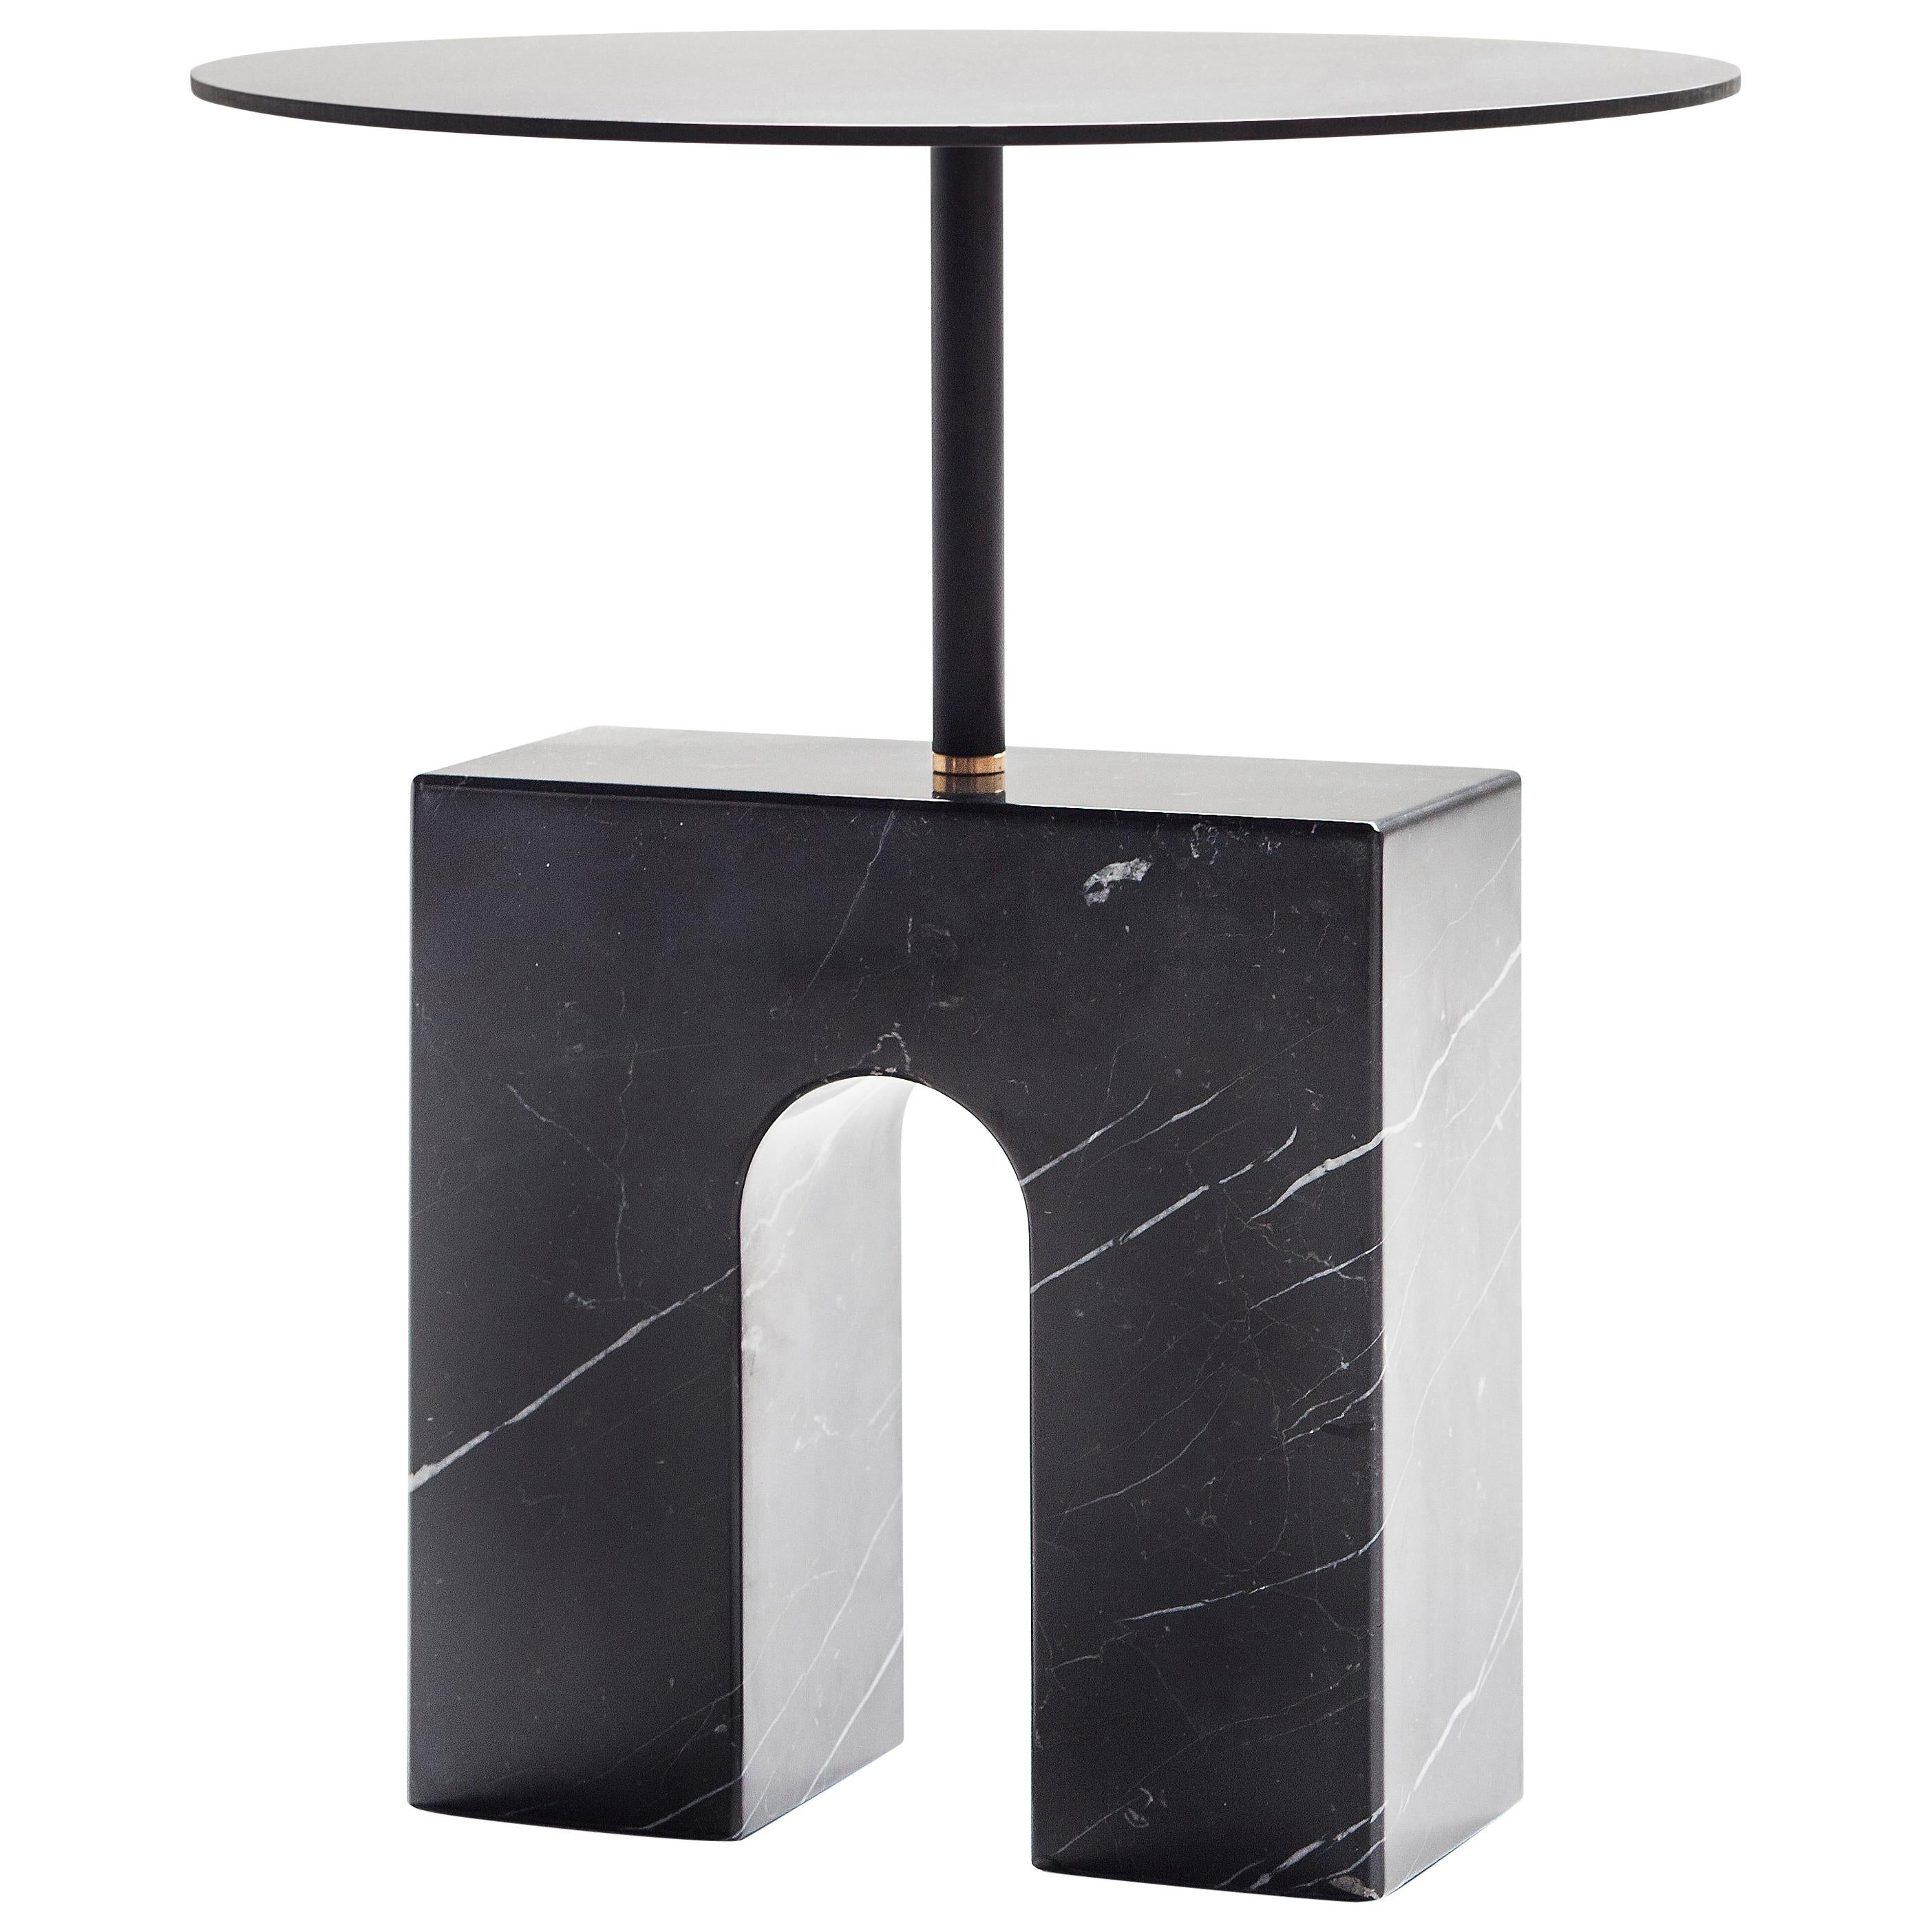 “Triumph Side Table” Minimalist Marquina Marble Side Table by Aparentment